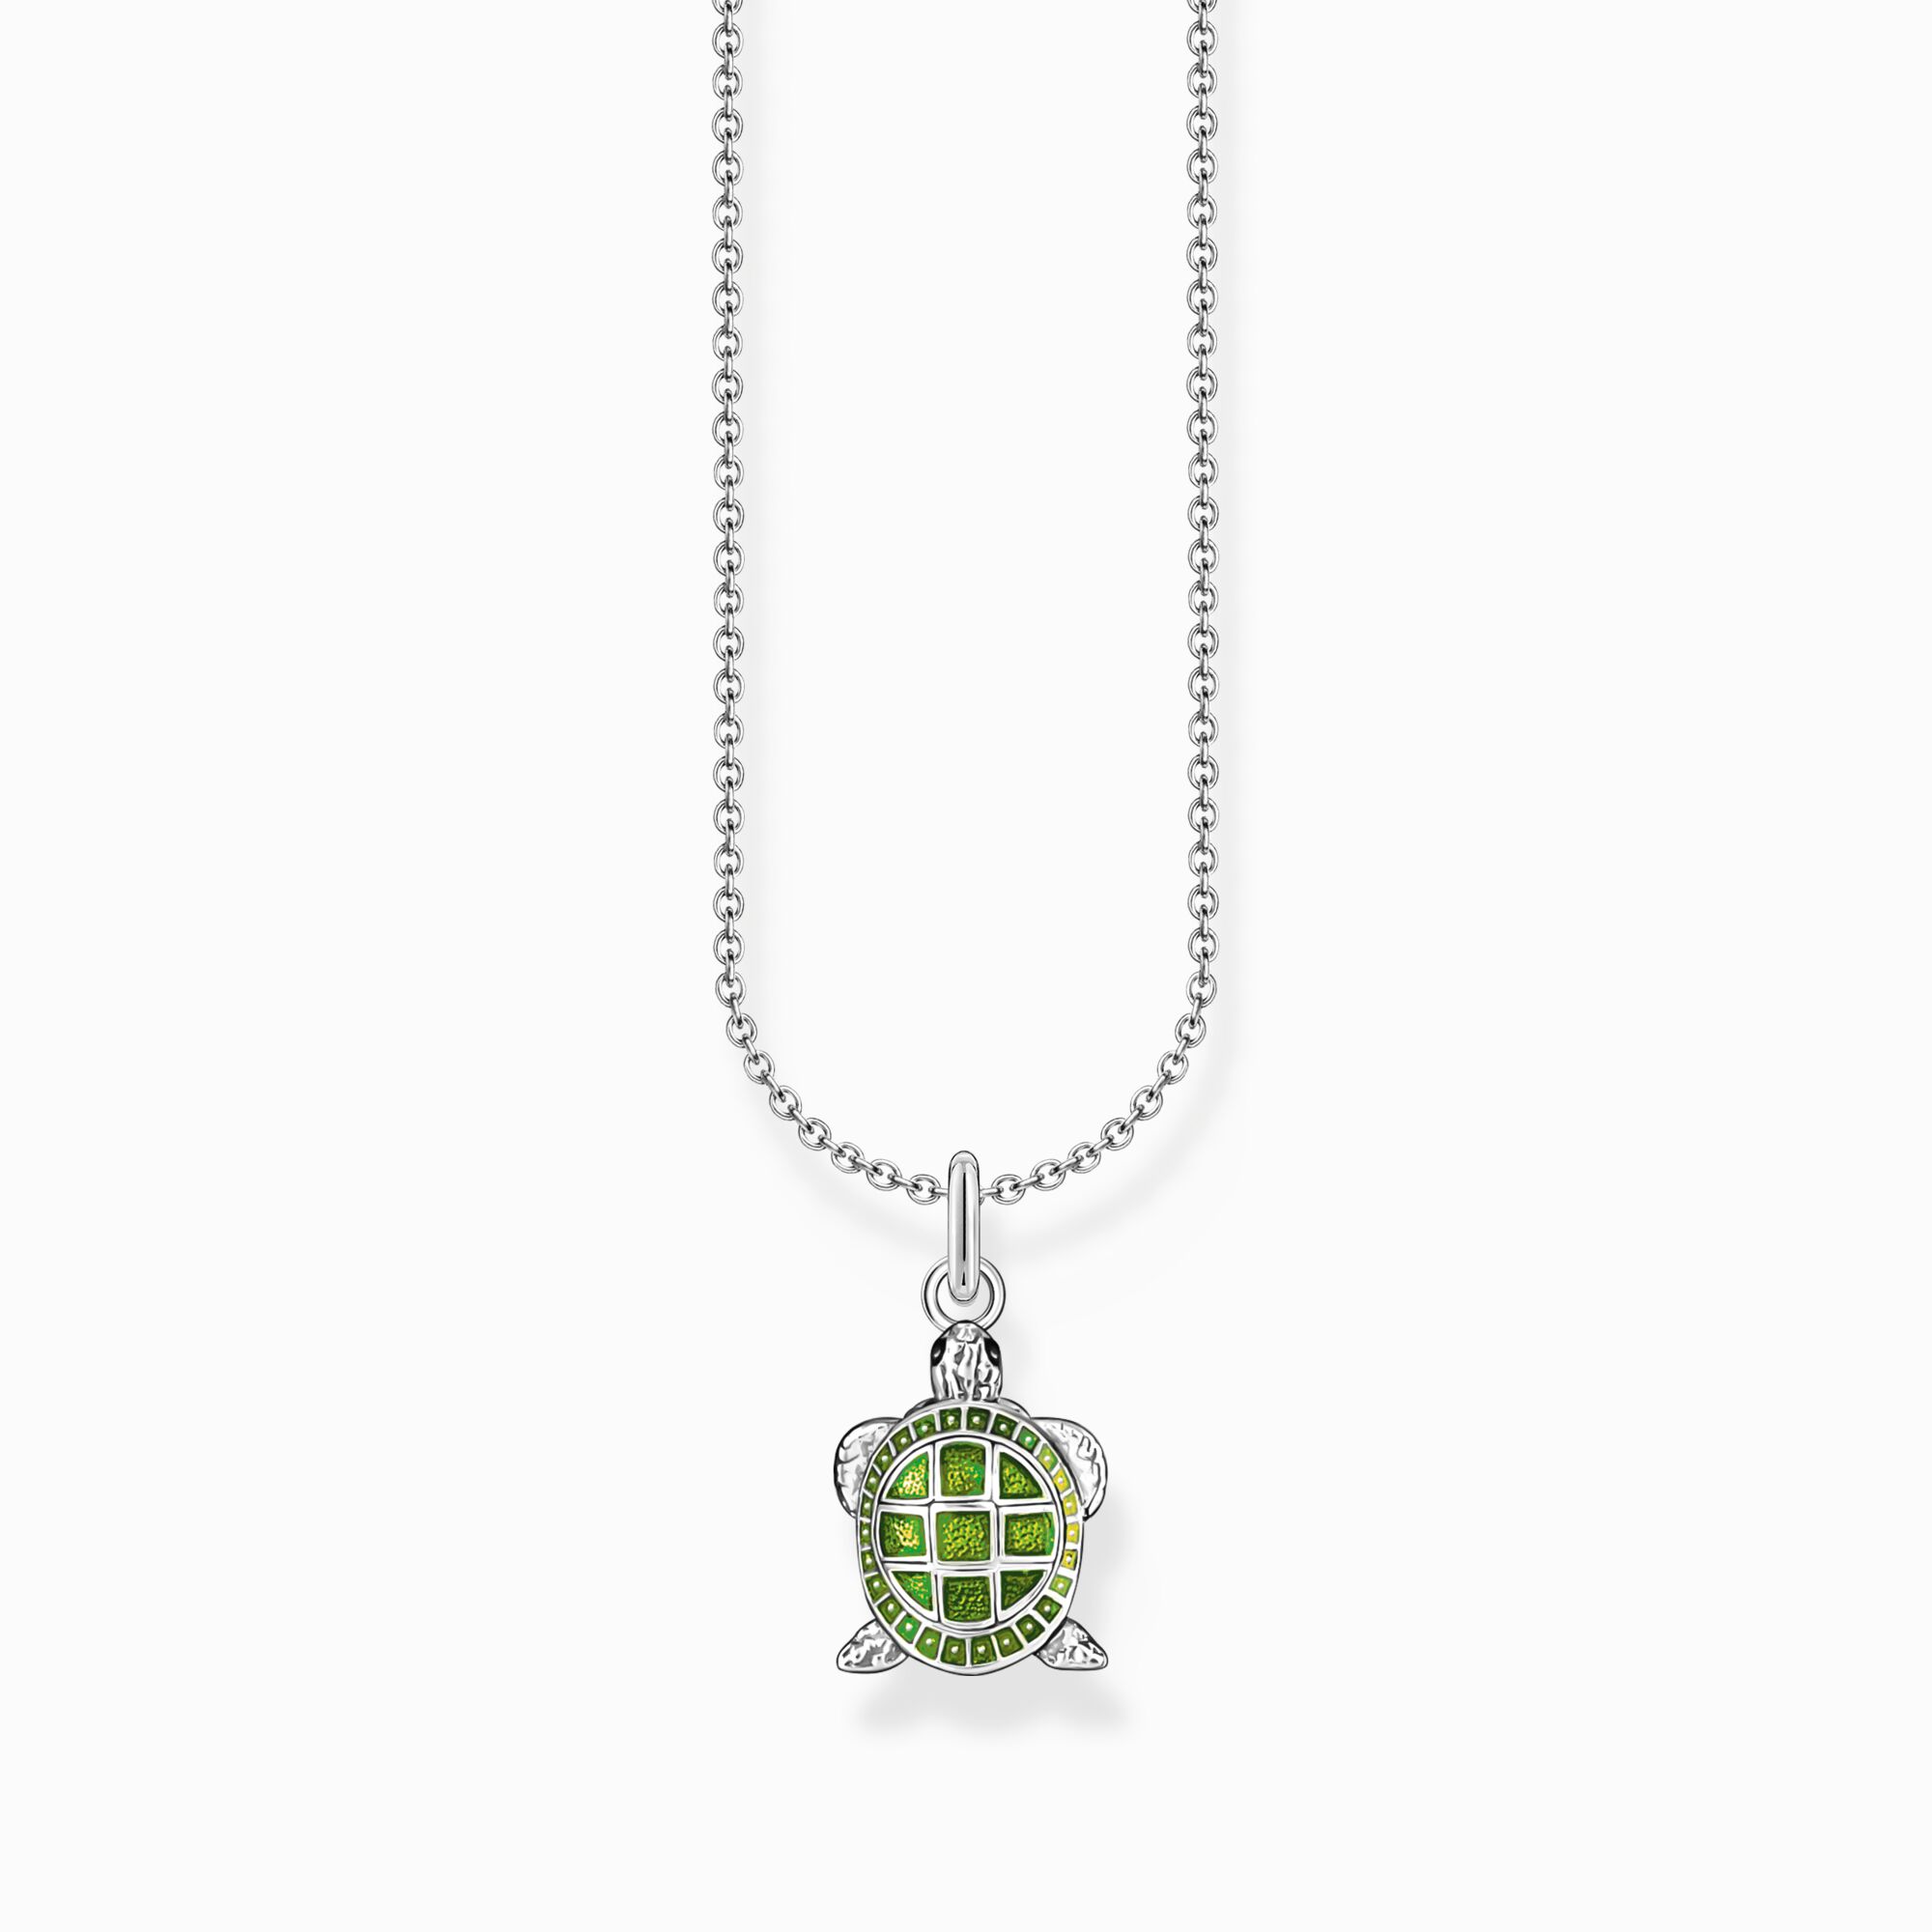 Silver necklace with turtle pendant with cold enamel from the Charming Collection collection in the THOMAS SABO online store